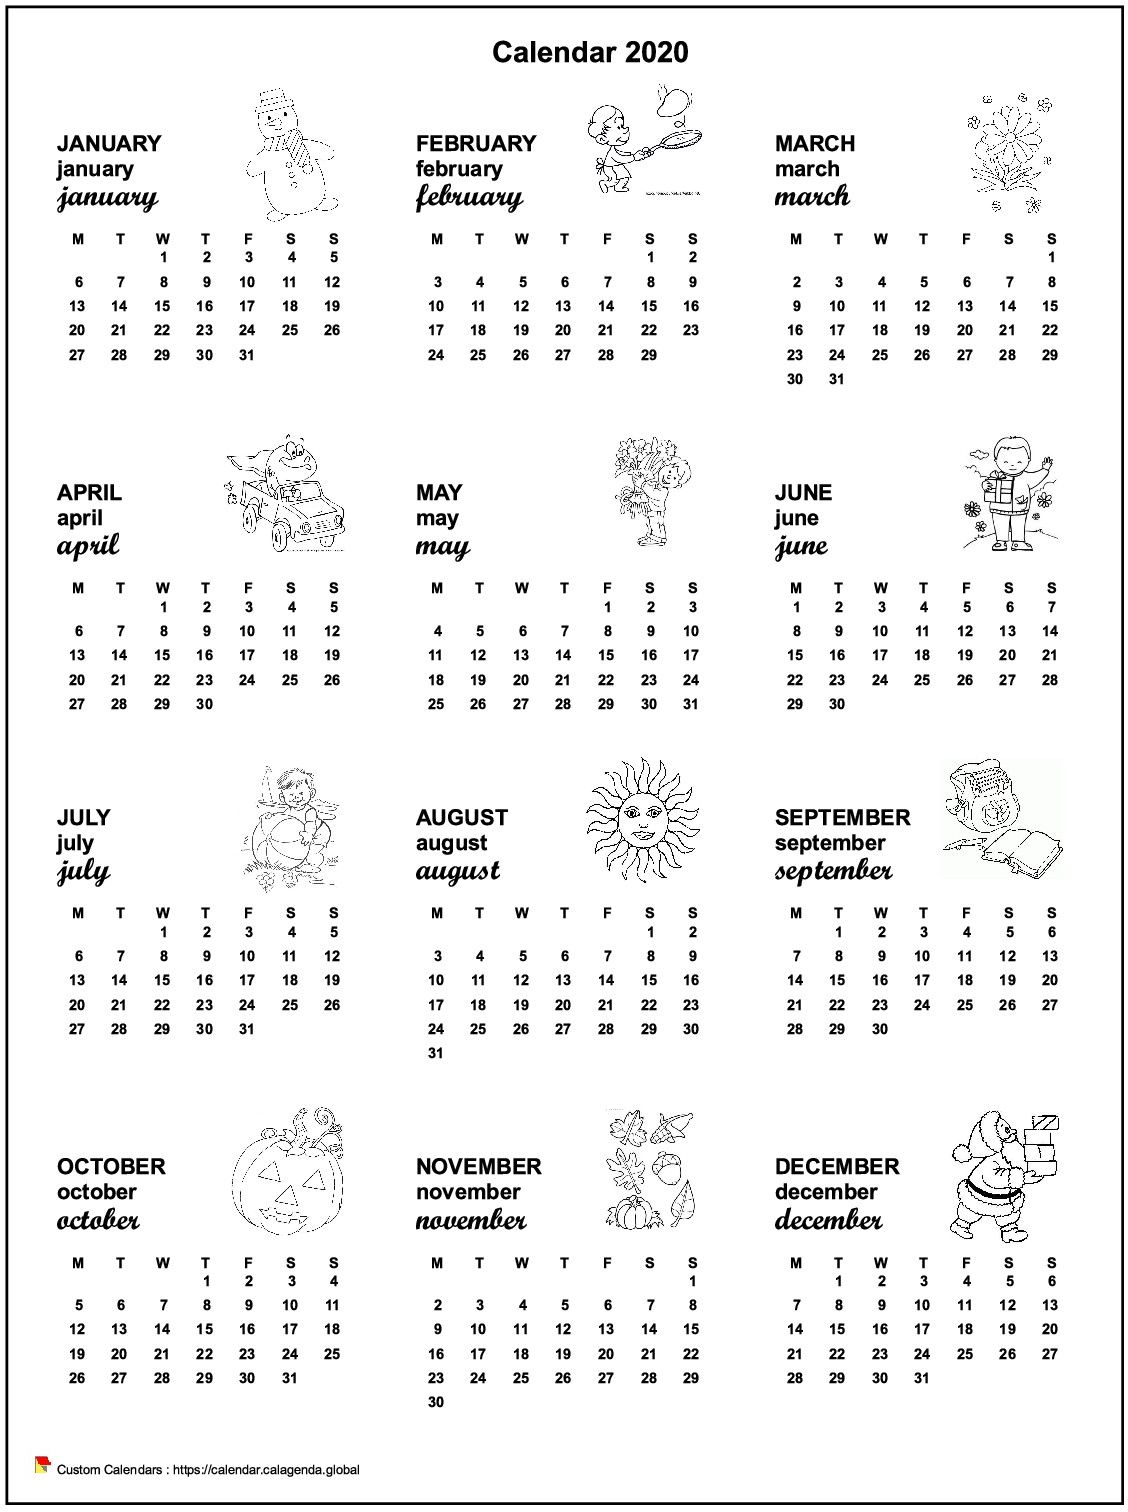 Calendar 2090 annual maternal and primary school